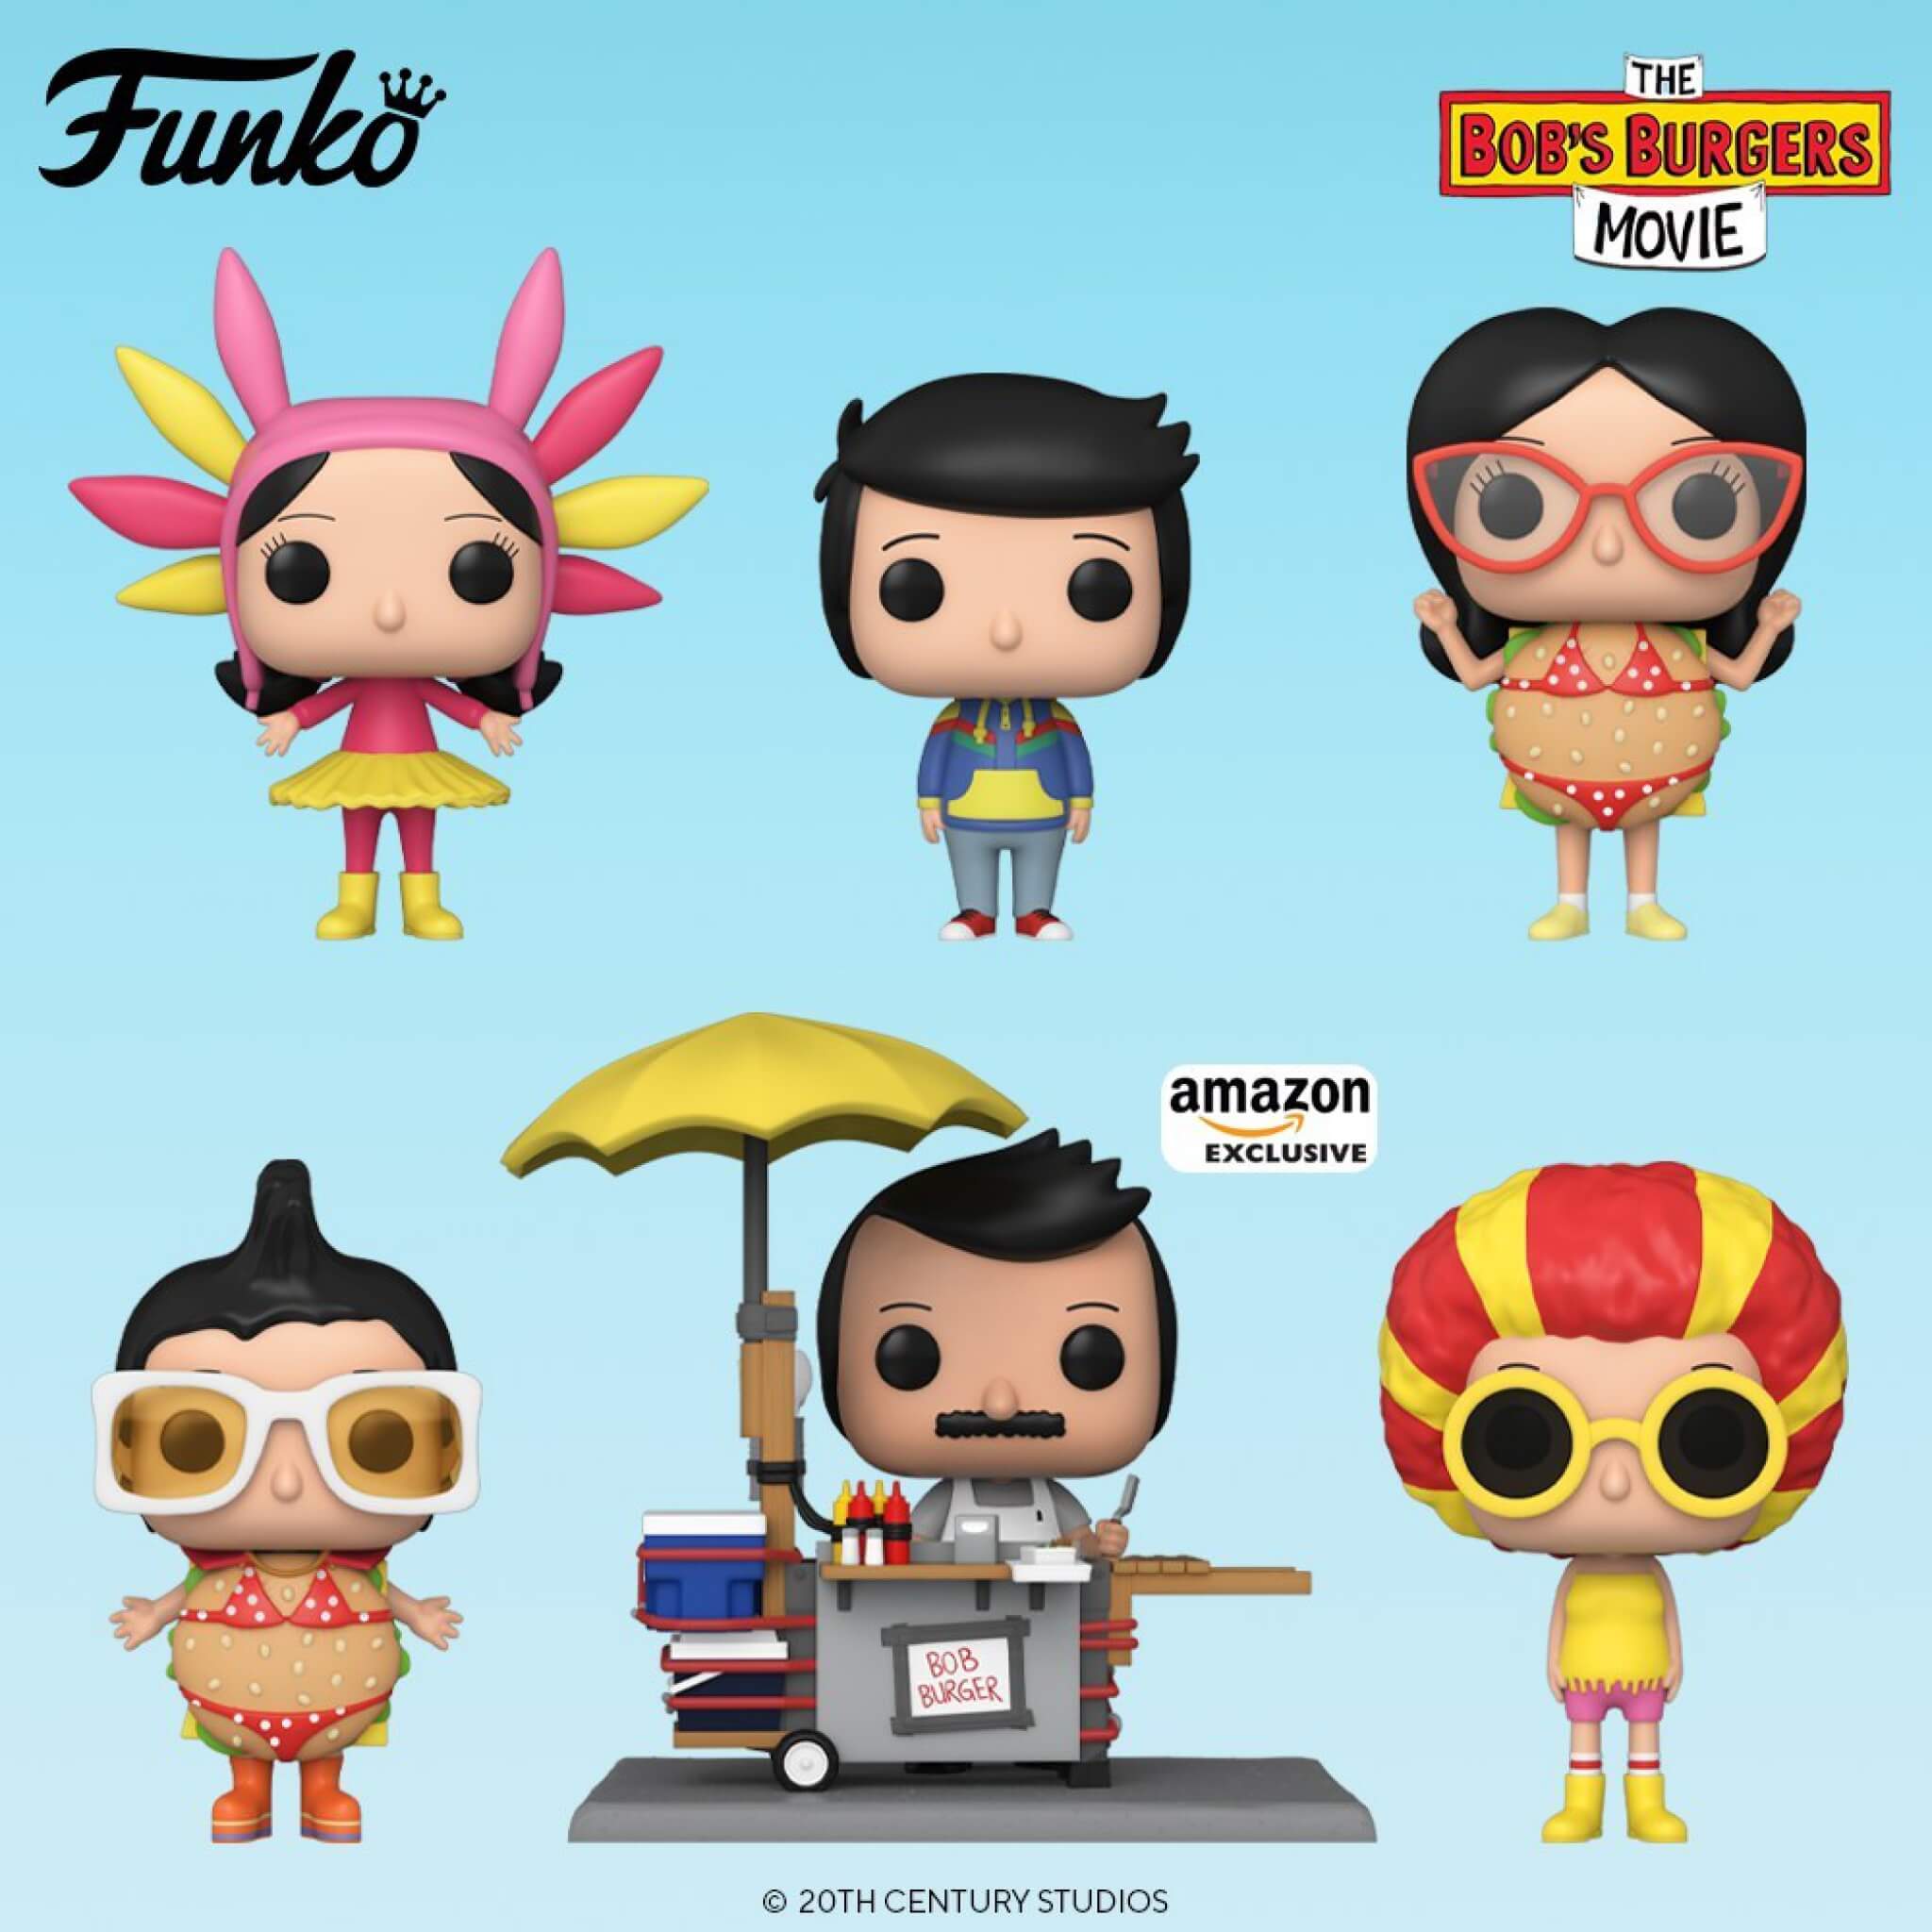 The Funko POP of the movie Bob's Burgers have arrived